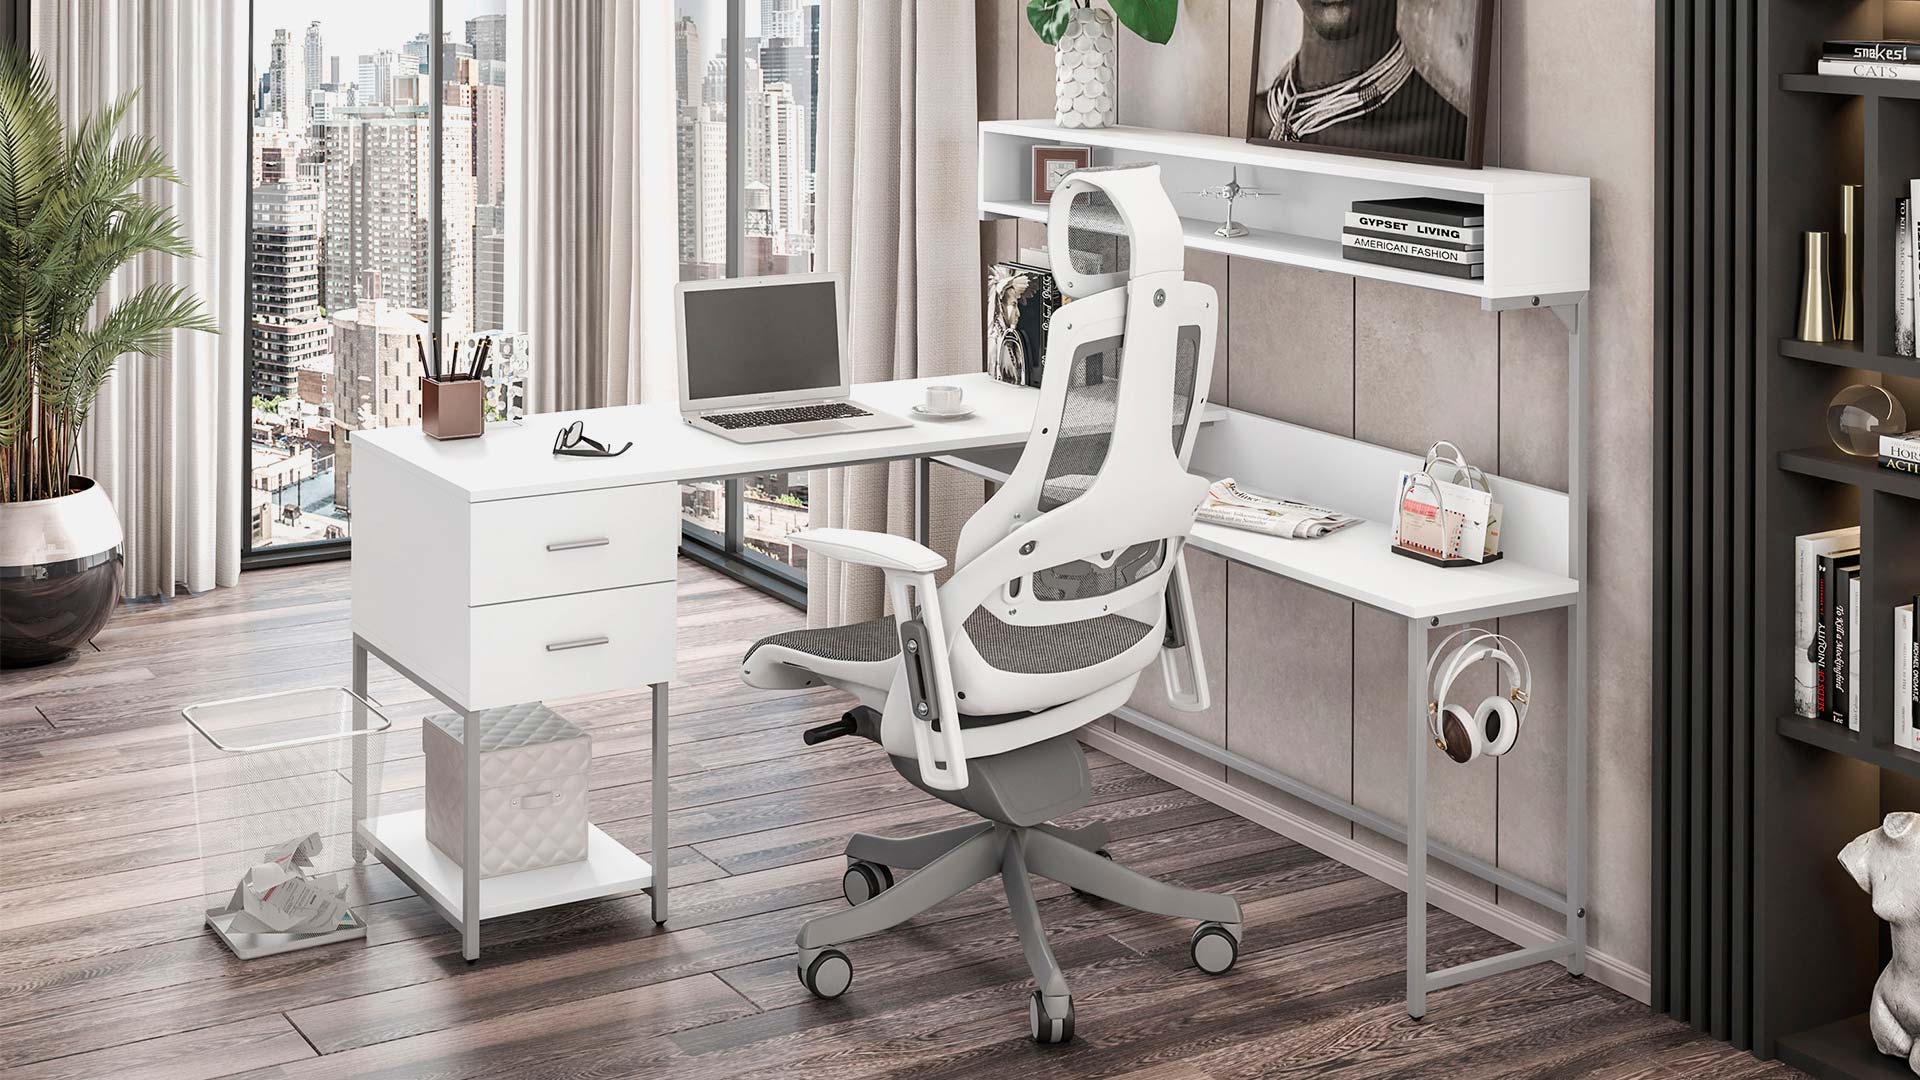 What to Consider When Buying an L-Shaped Adjustable Desk